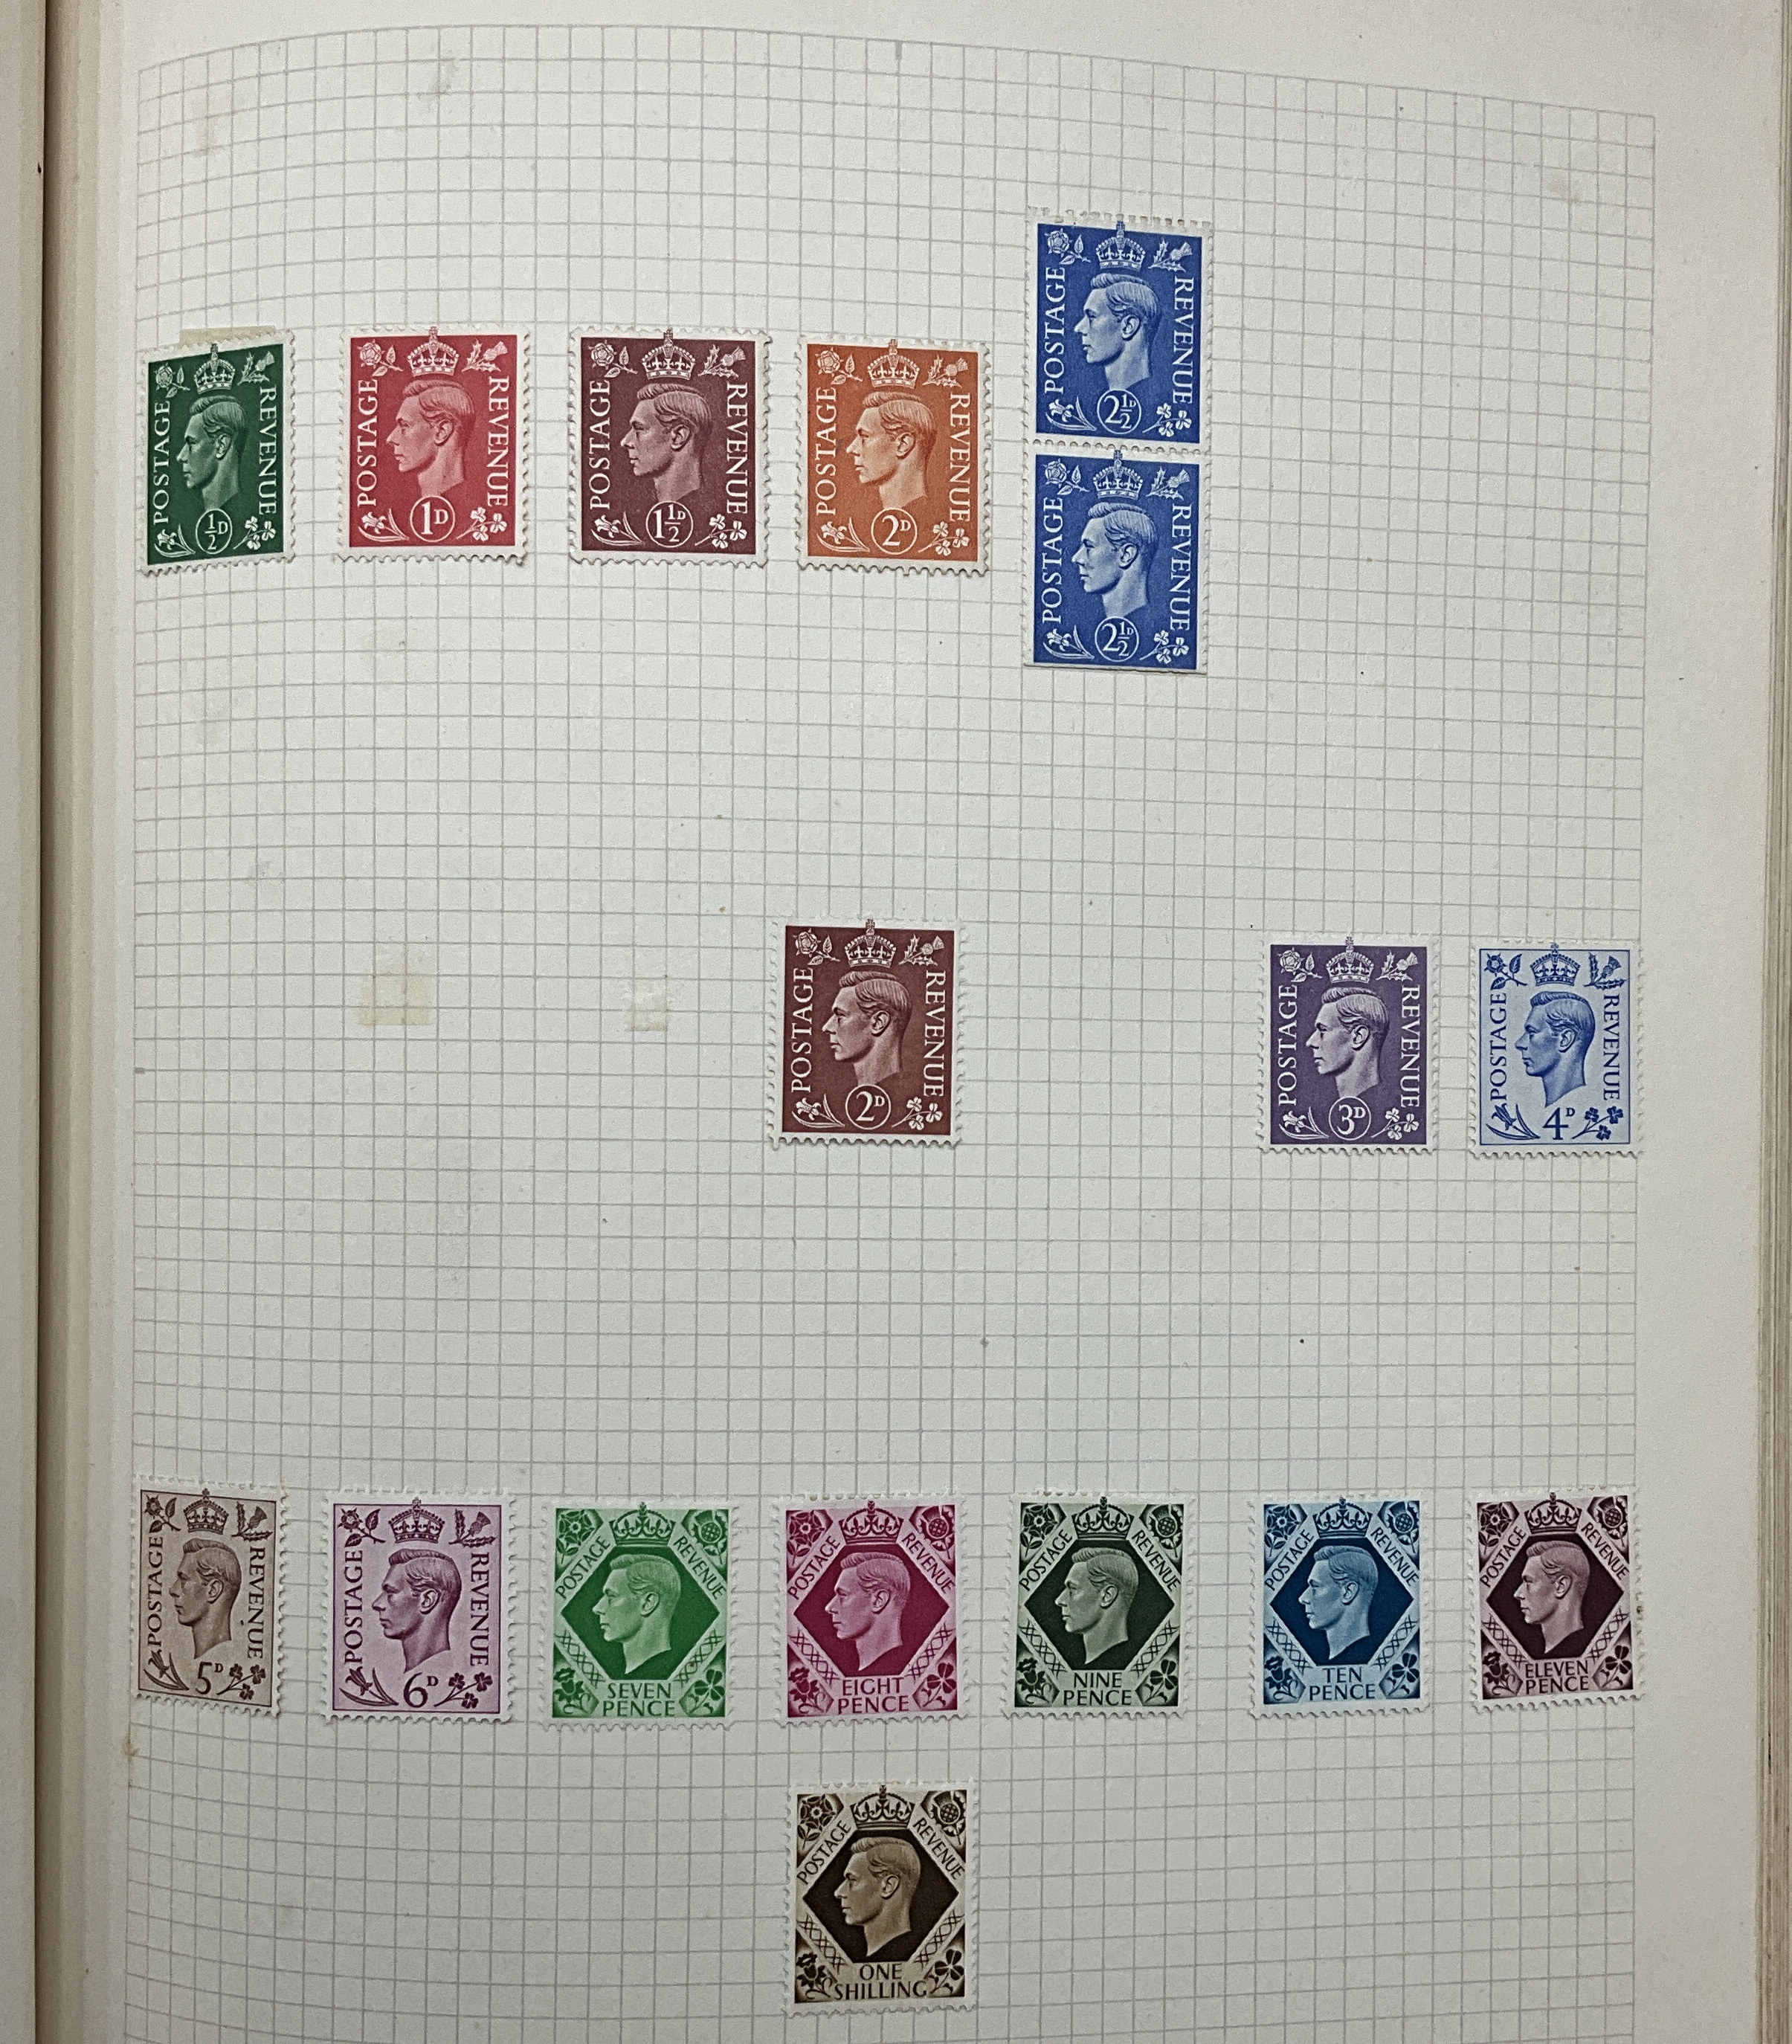 MINT QUEEN VICTORIA JUBILEE SET & SOME MINT EARLY COMMONWEALTH STAMPS IN ALBUM - HIGH VALUE - Image 4 of 15